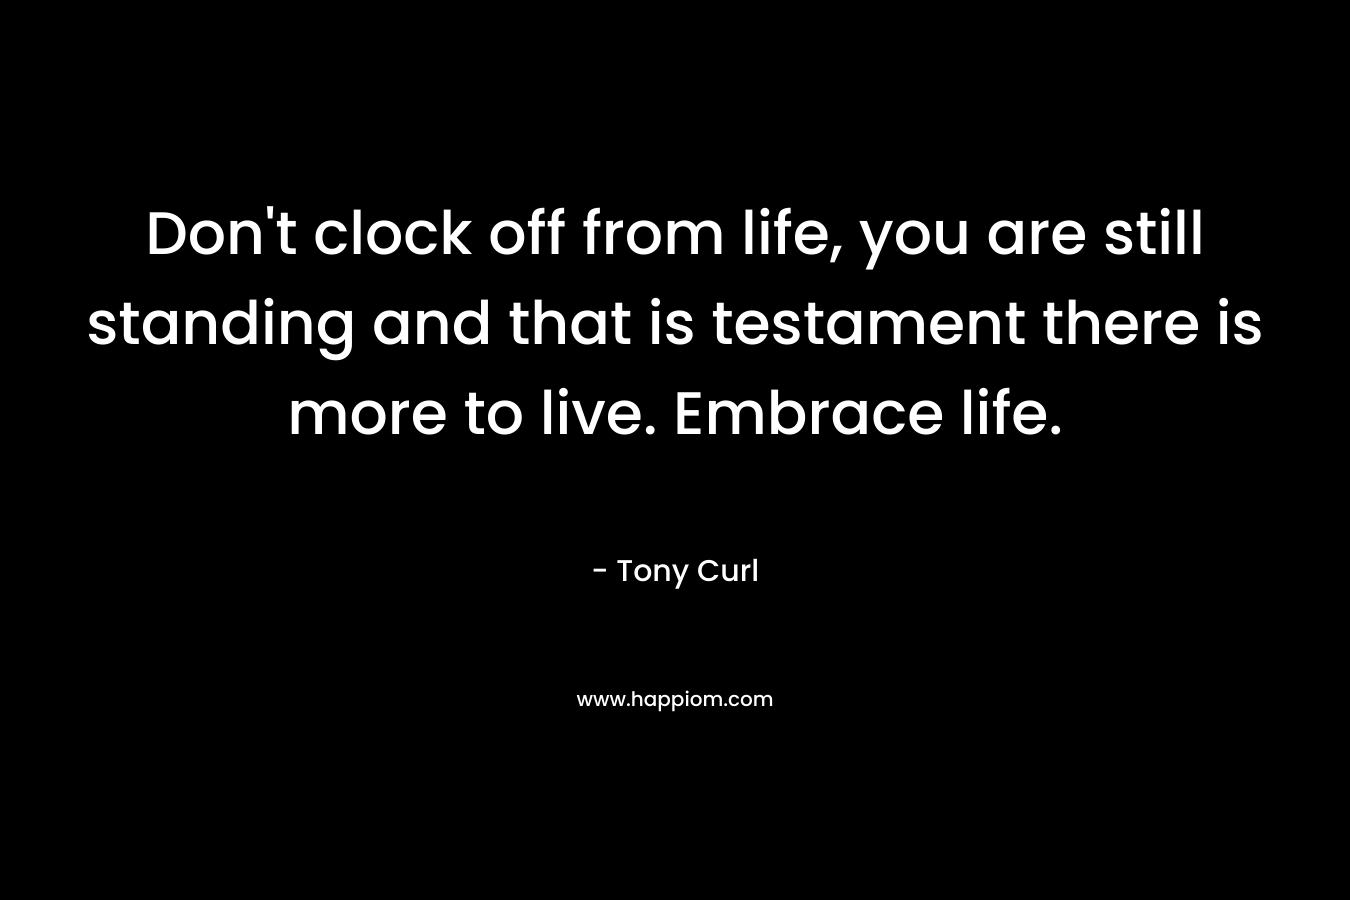 Don't clock off from life, you are still standing and that is testament there is more to live. Embrace life.